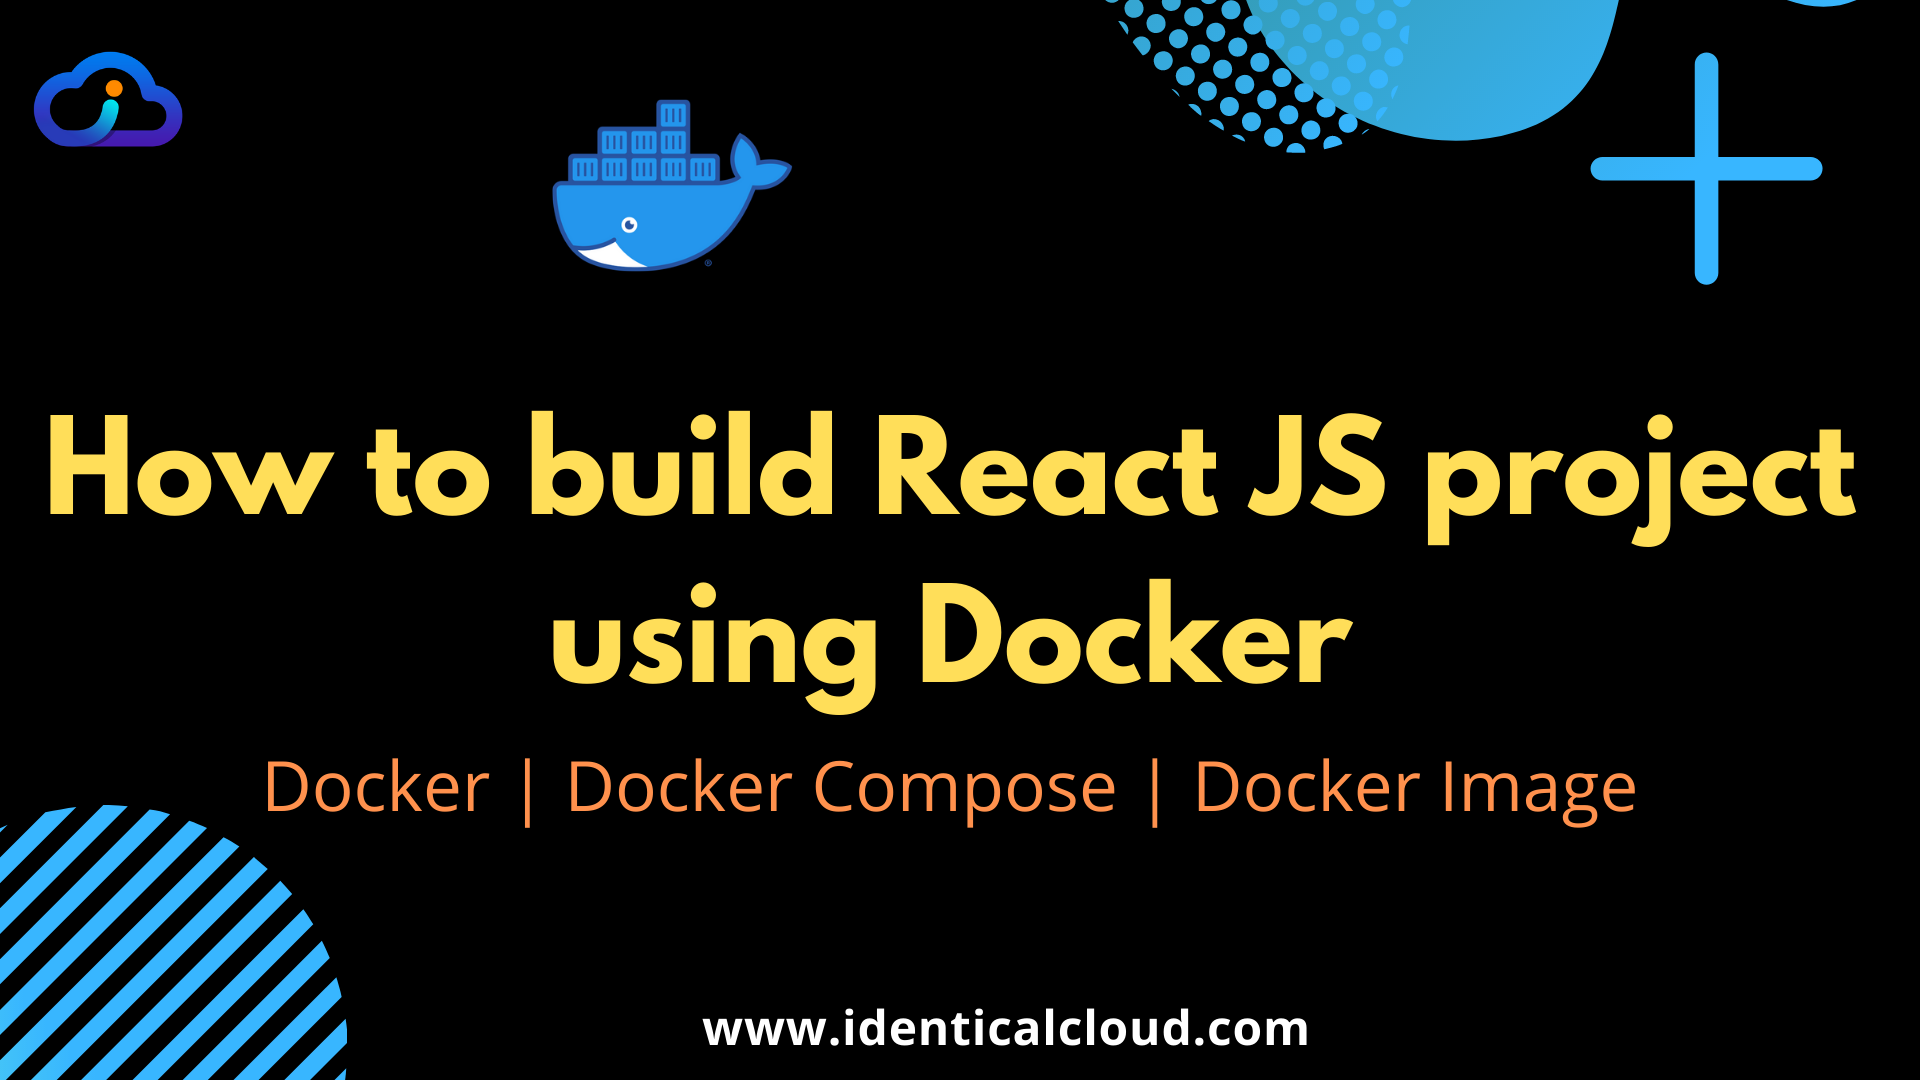 How to Build and Deploy ReactJS project using Docker